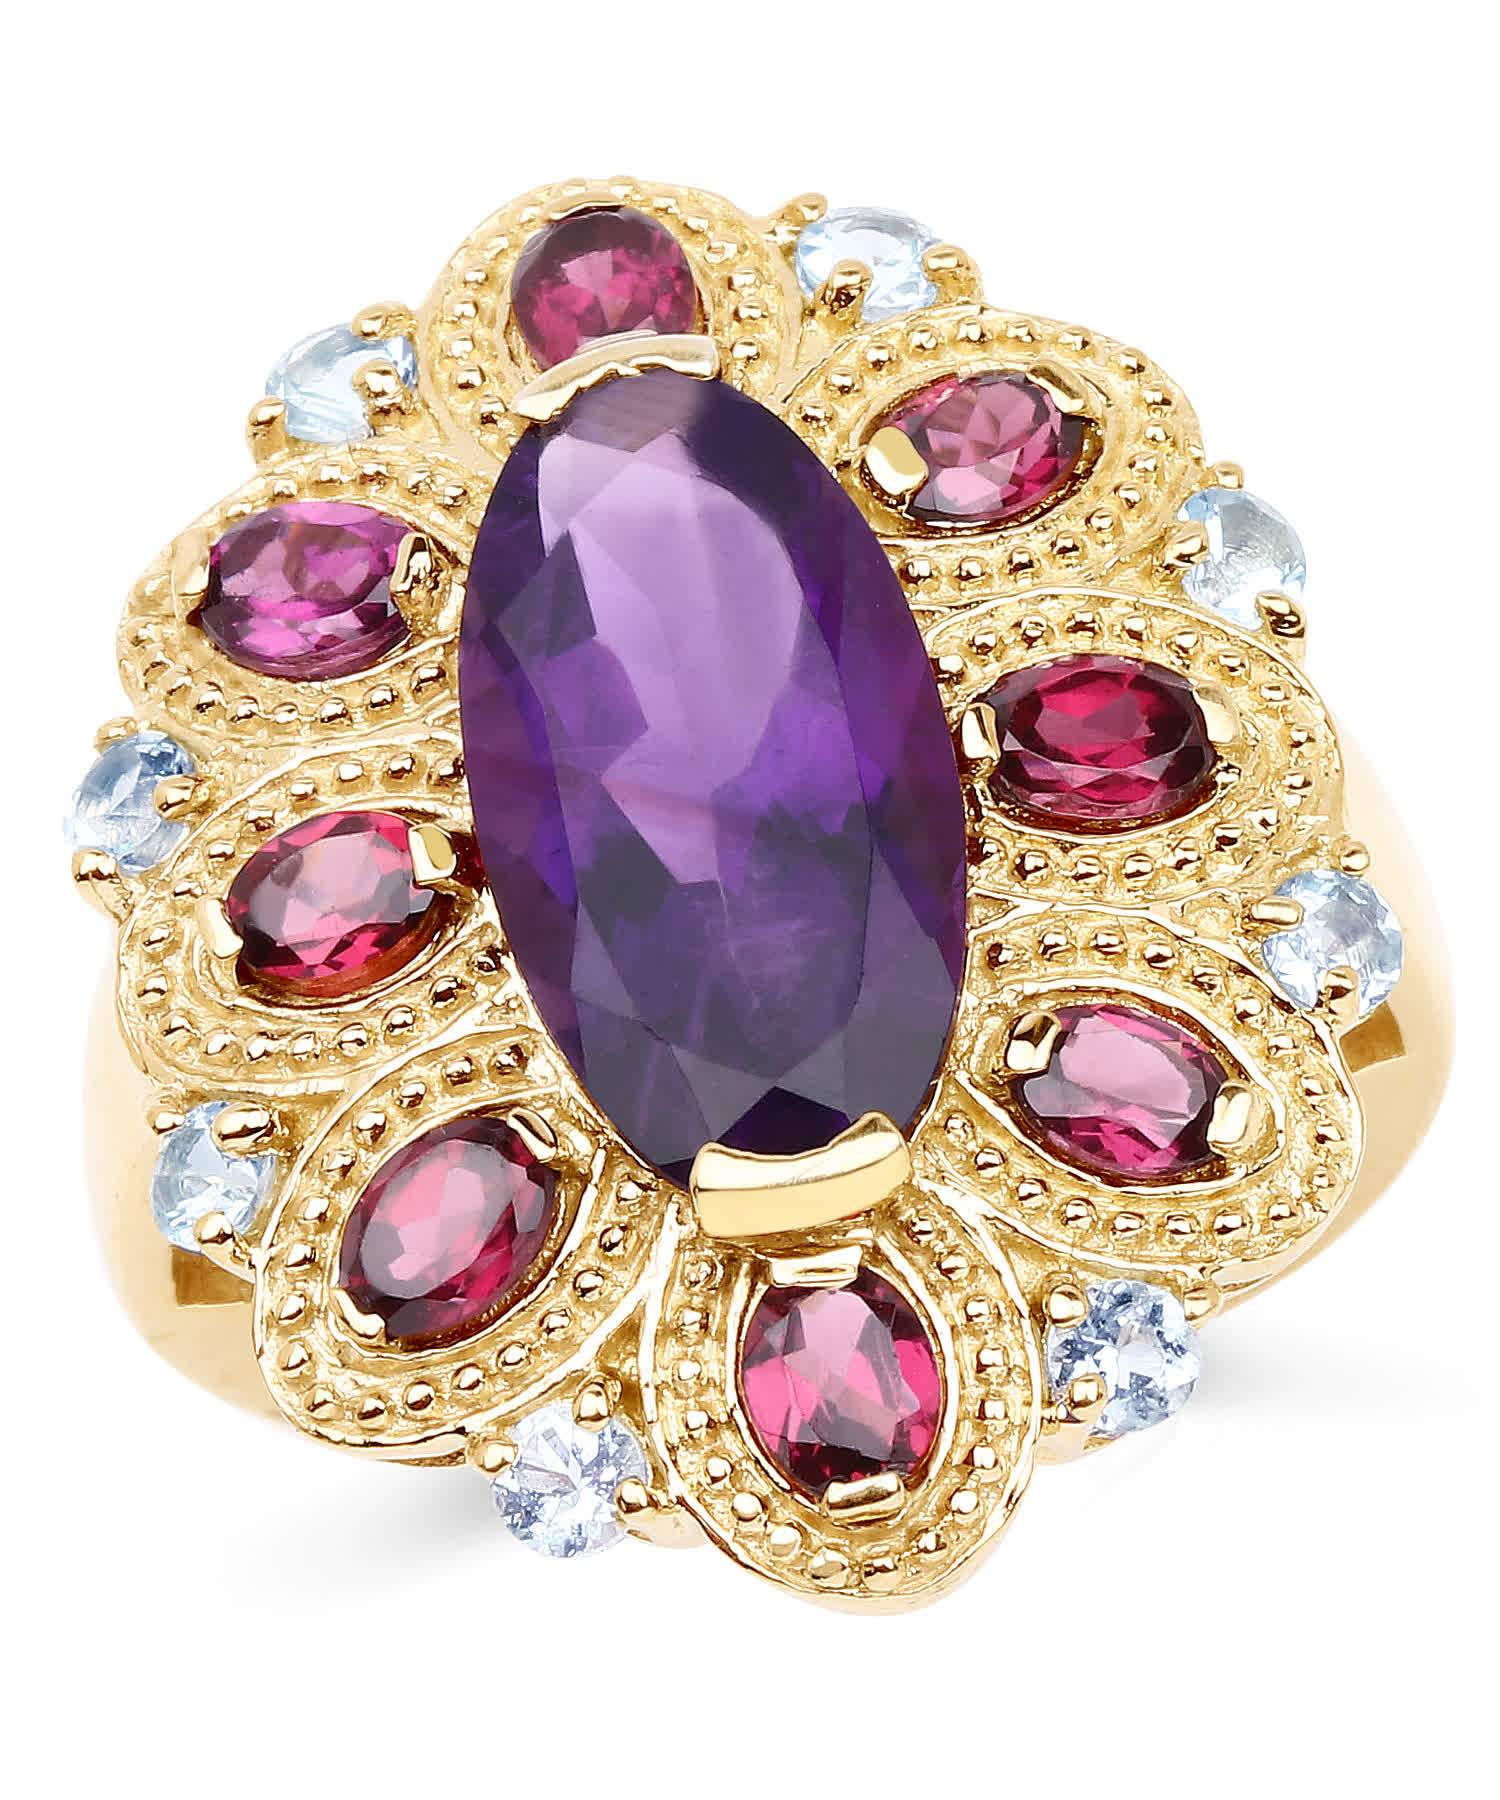 6.80ctw Natural Amethyst, Rhodolite Garnet and Sky Blue Topaz 14k Gold Plated 925 Sterling Silver Cocktail Ring View 1